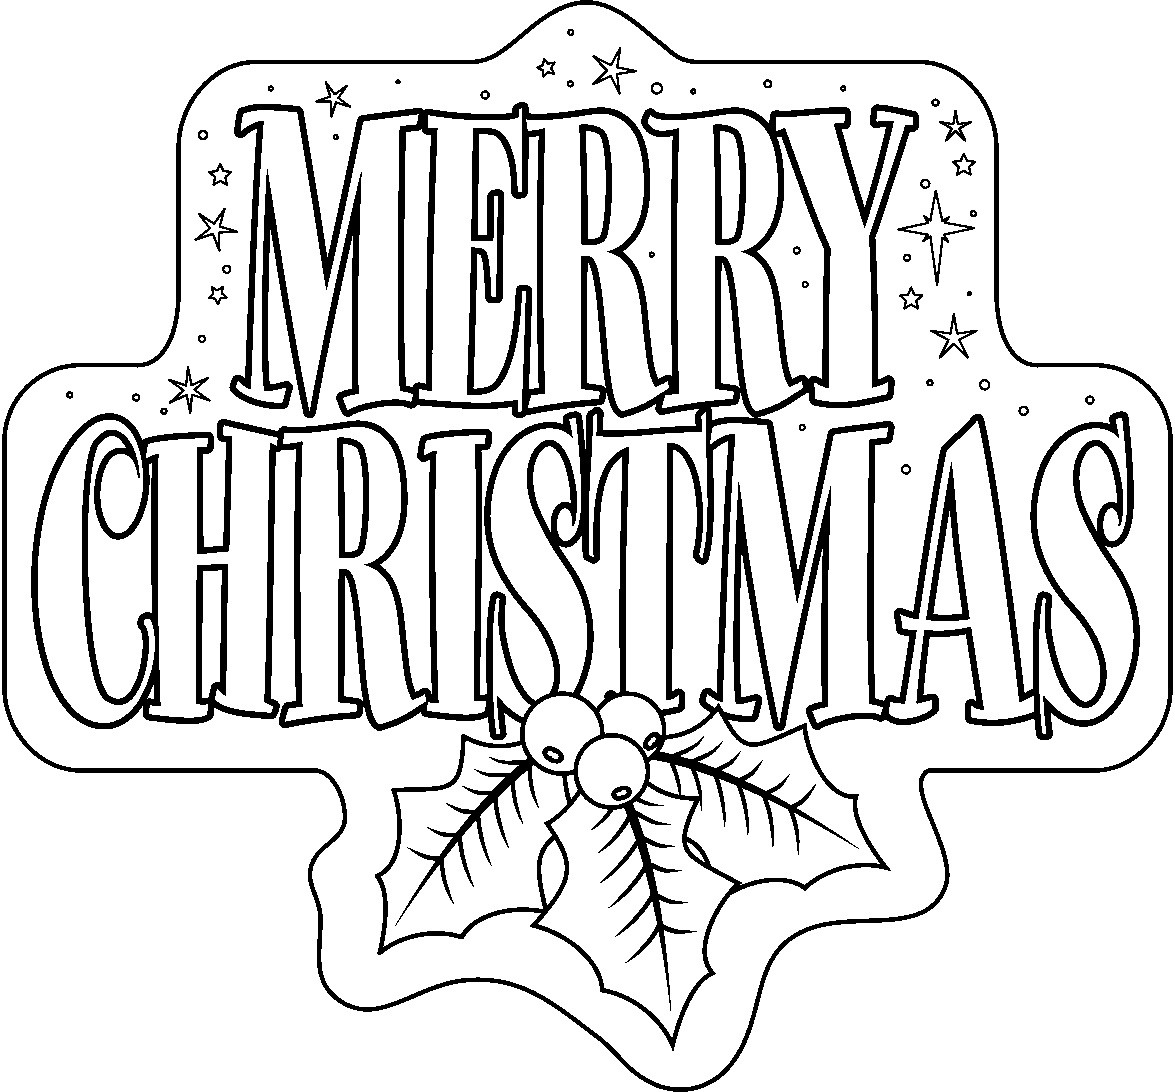 Toddler Merry Christmas 2018 Coloring Pages
 Free Printable Merry Christmas Coloring Pages